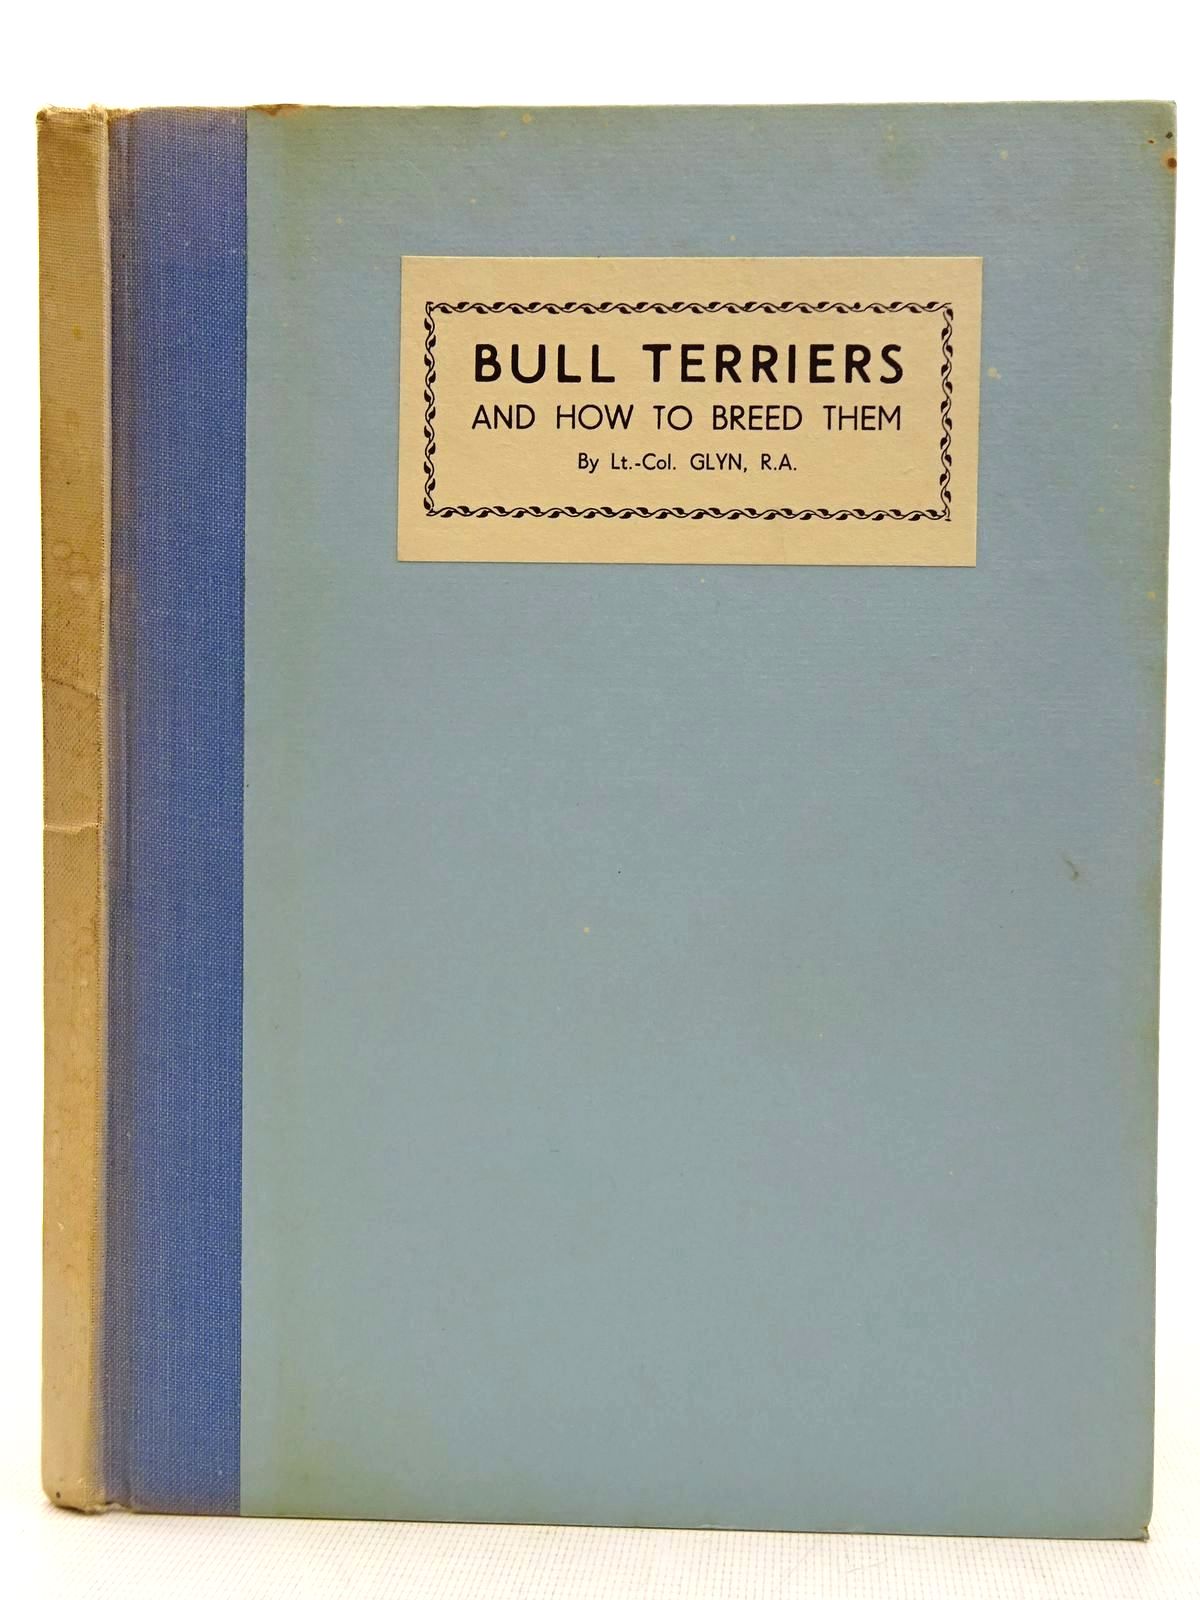 Photo of BULL TERRIERS AND HOW TO BREED THEM written by Glyn, R.H. published by Hall The Publisher (STOCK CODE: 2128421)  for sale by Stella & Rose's Books